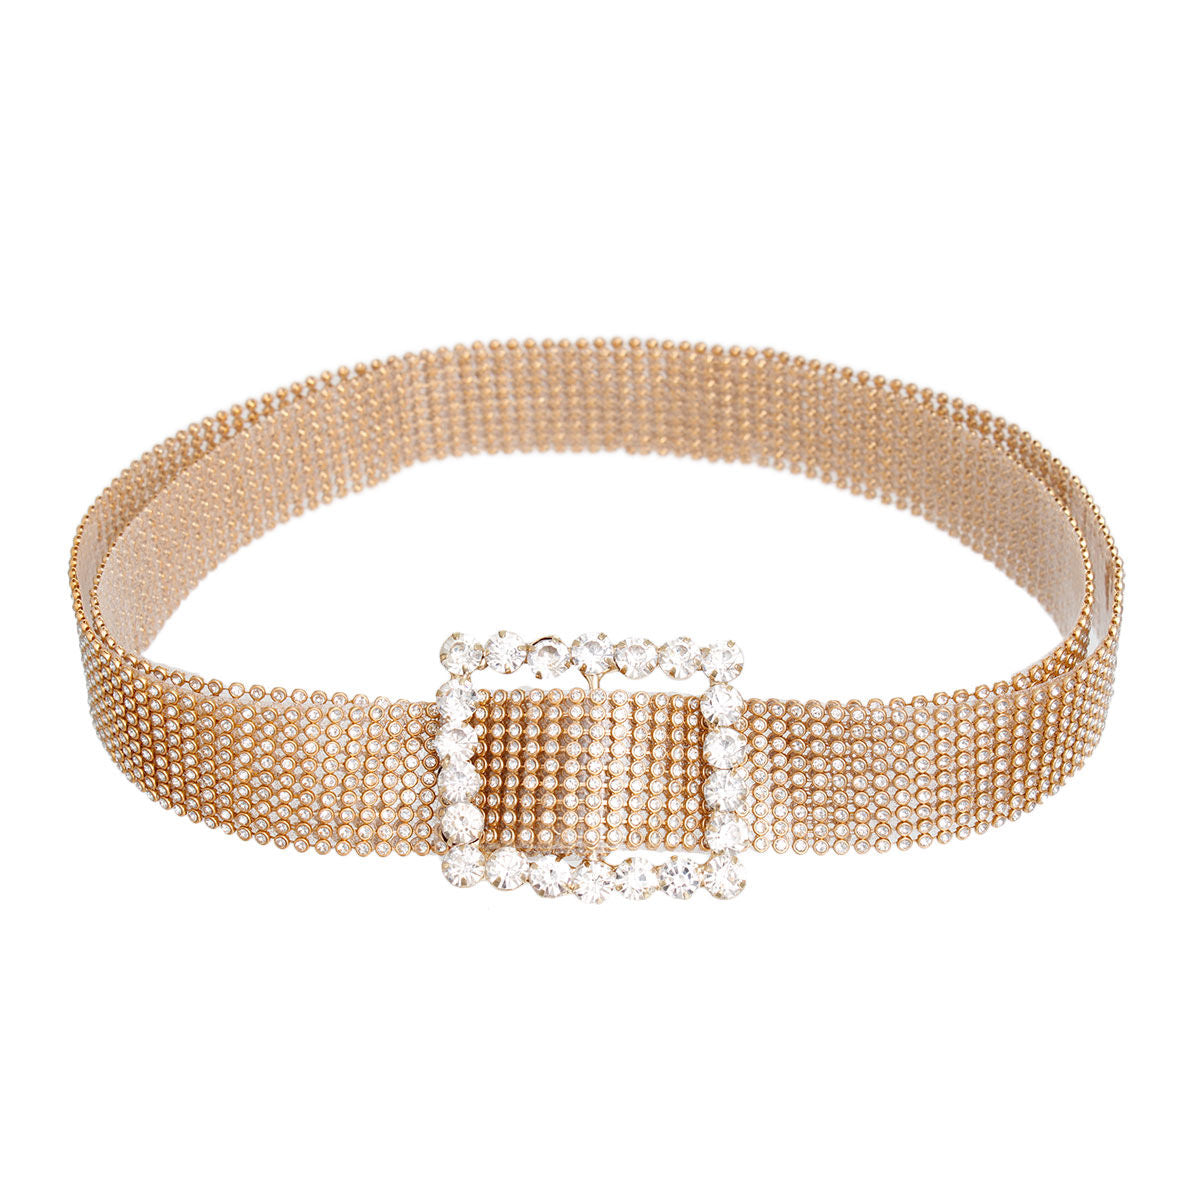 Gold Pave 9 Row Buckle Belt